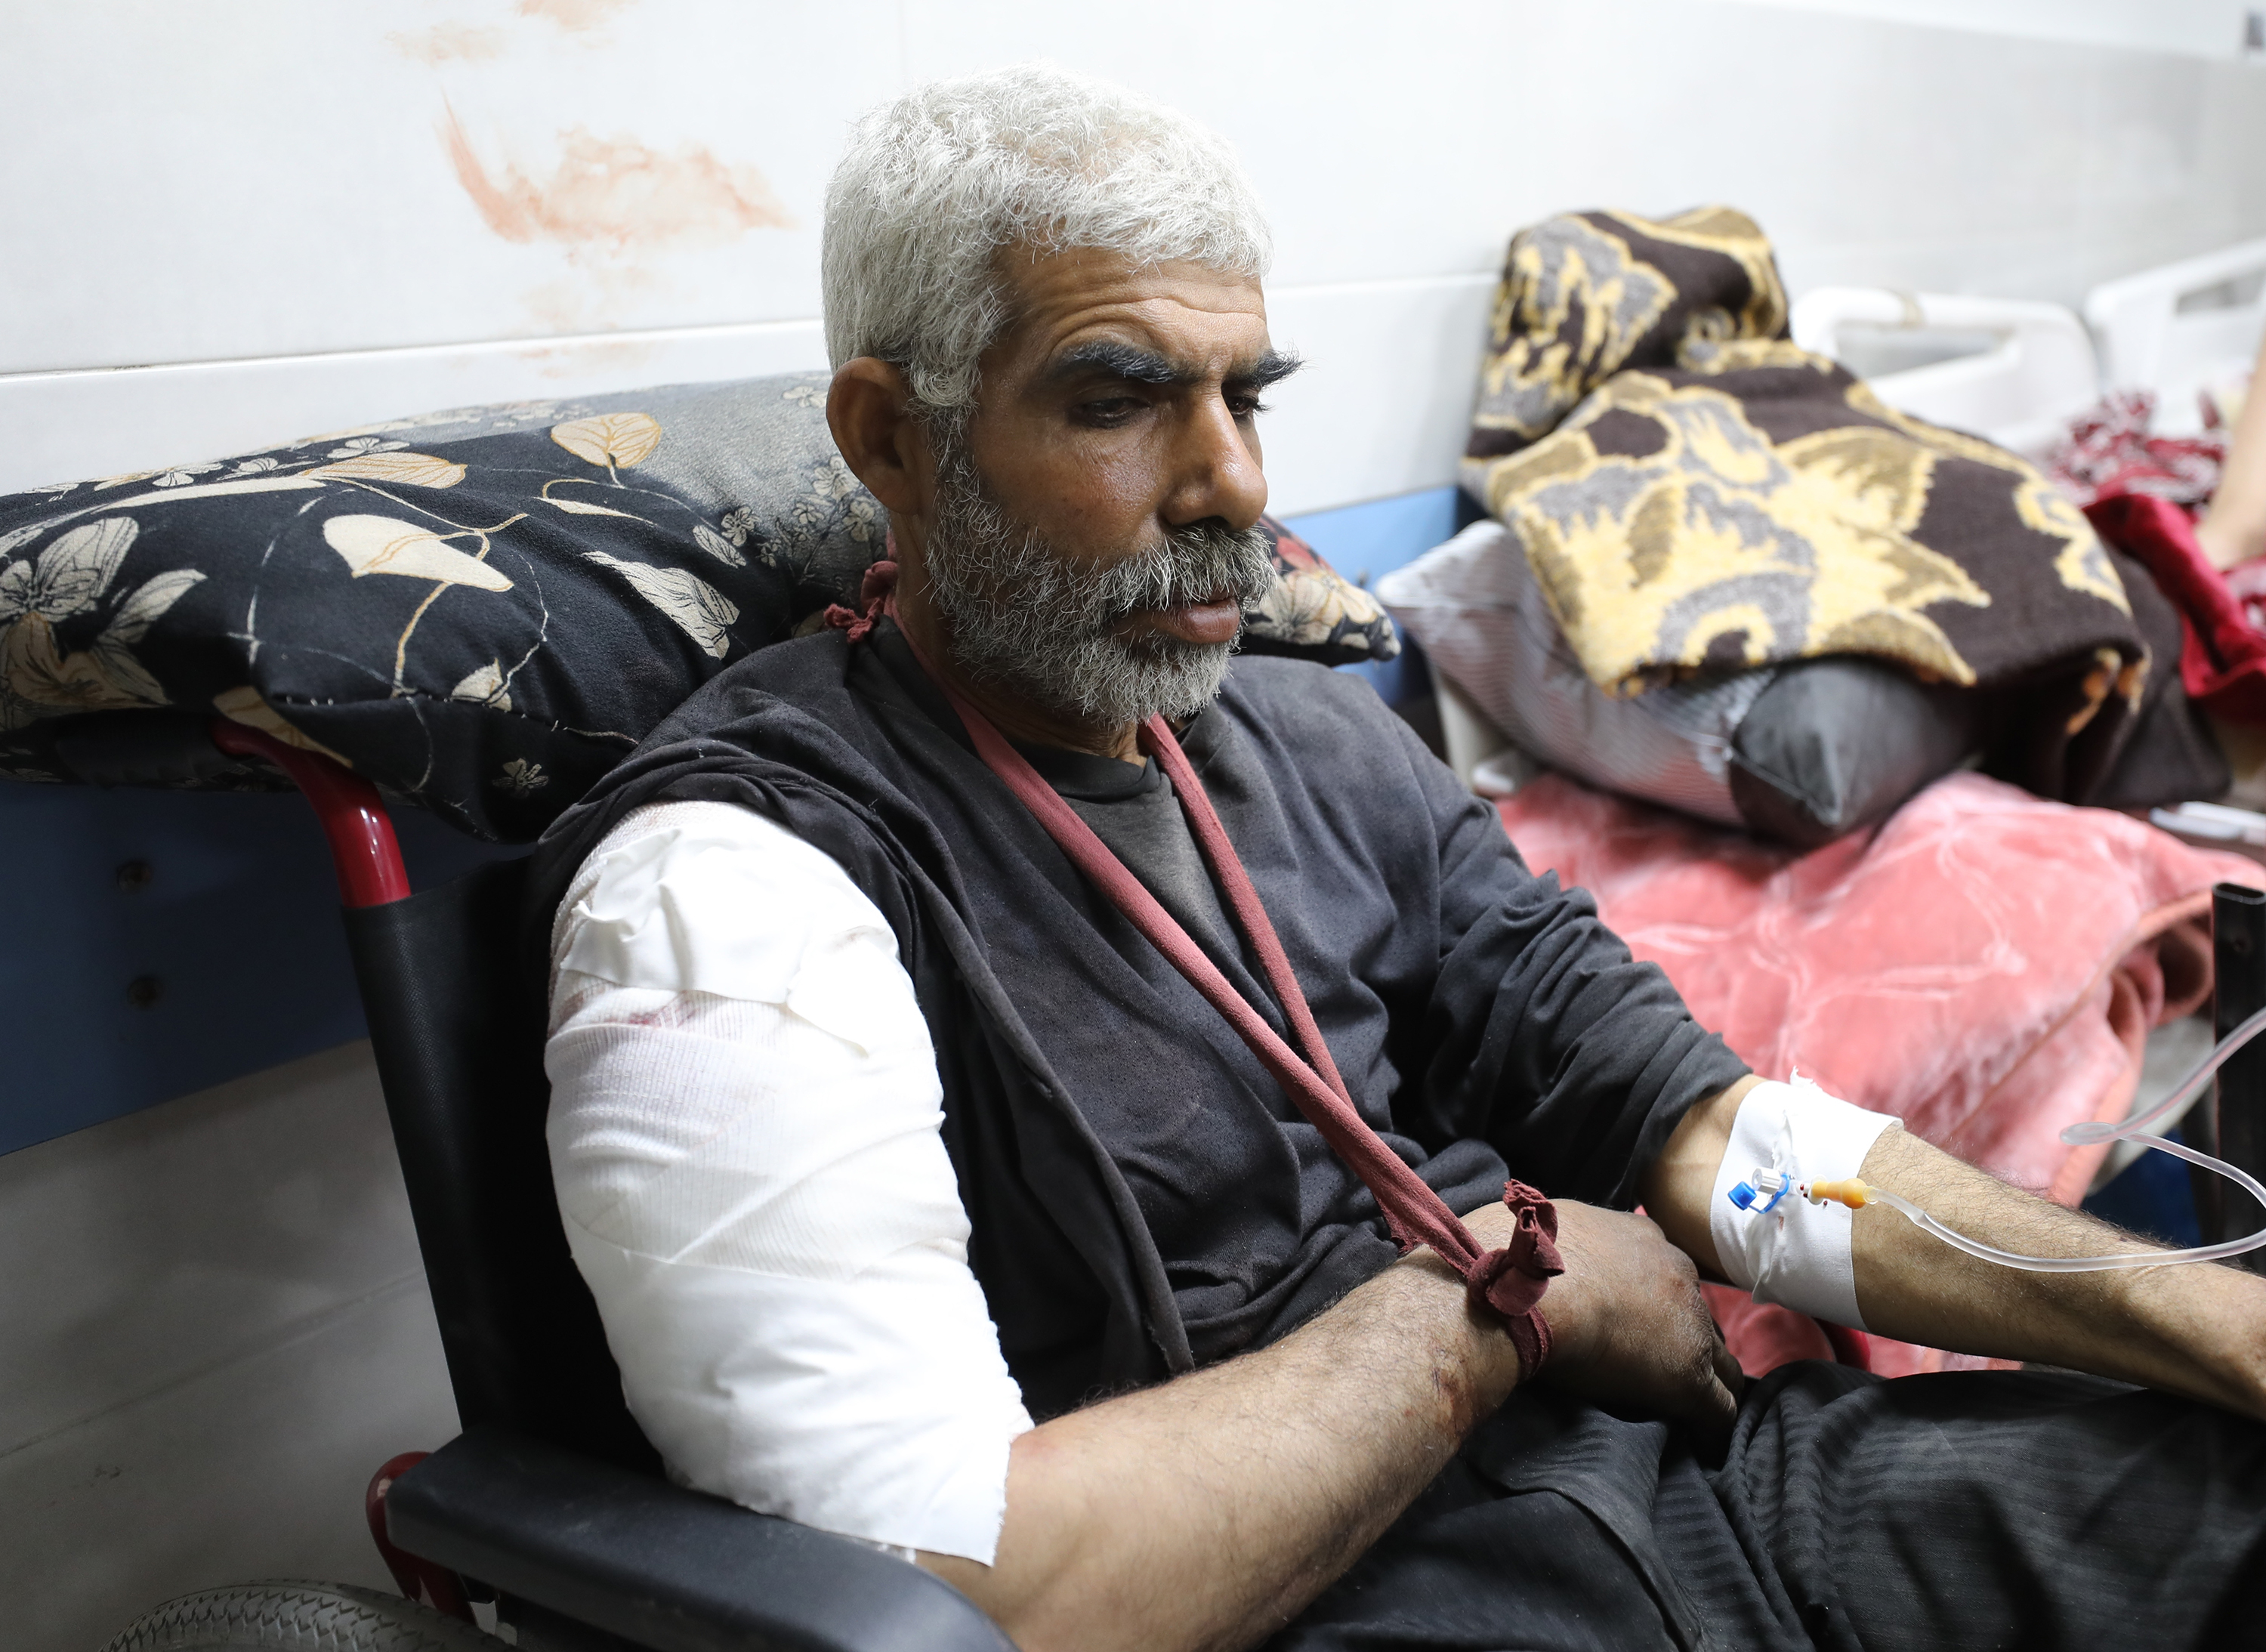 A wounded Palestinian receives medical treatment at Al-Shifa Hospital after Israeli forces opened fire on Palestinians waiting for humanitarian aid trucks on Al-Rashid Street in Gaza City, Gaza, on February 29.